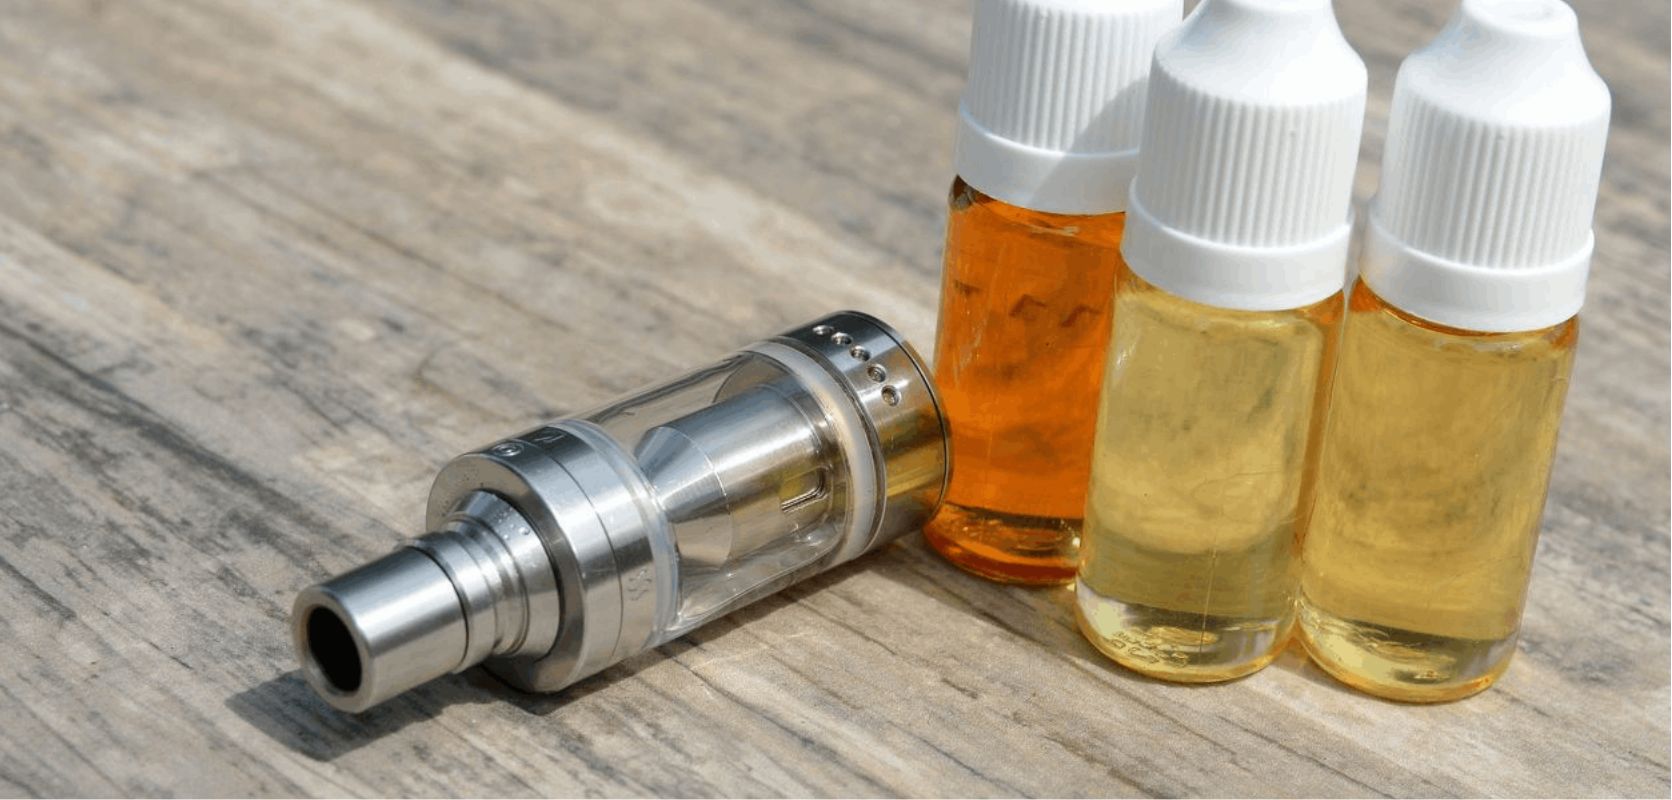 If you are feeling creative, here is the best way to make THC oil for your e-cigs. 